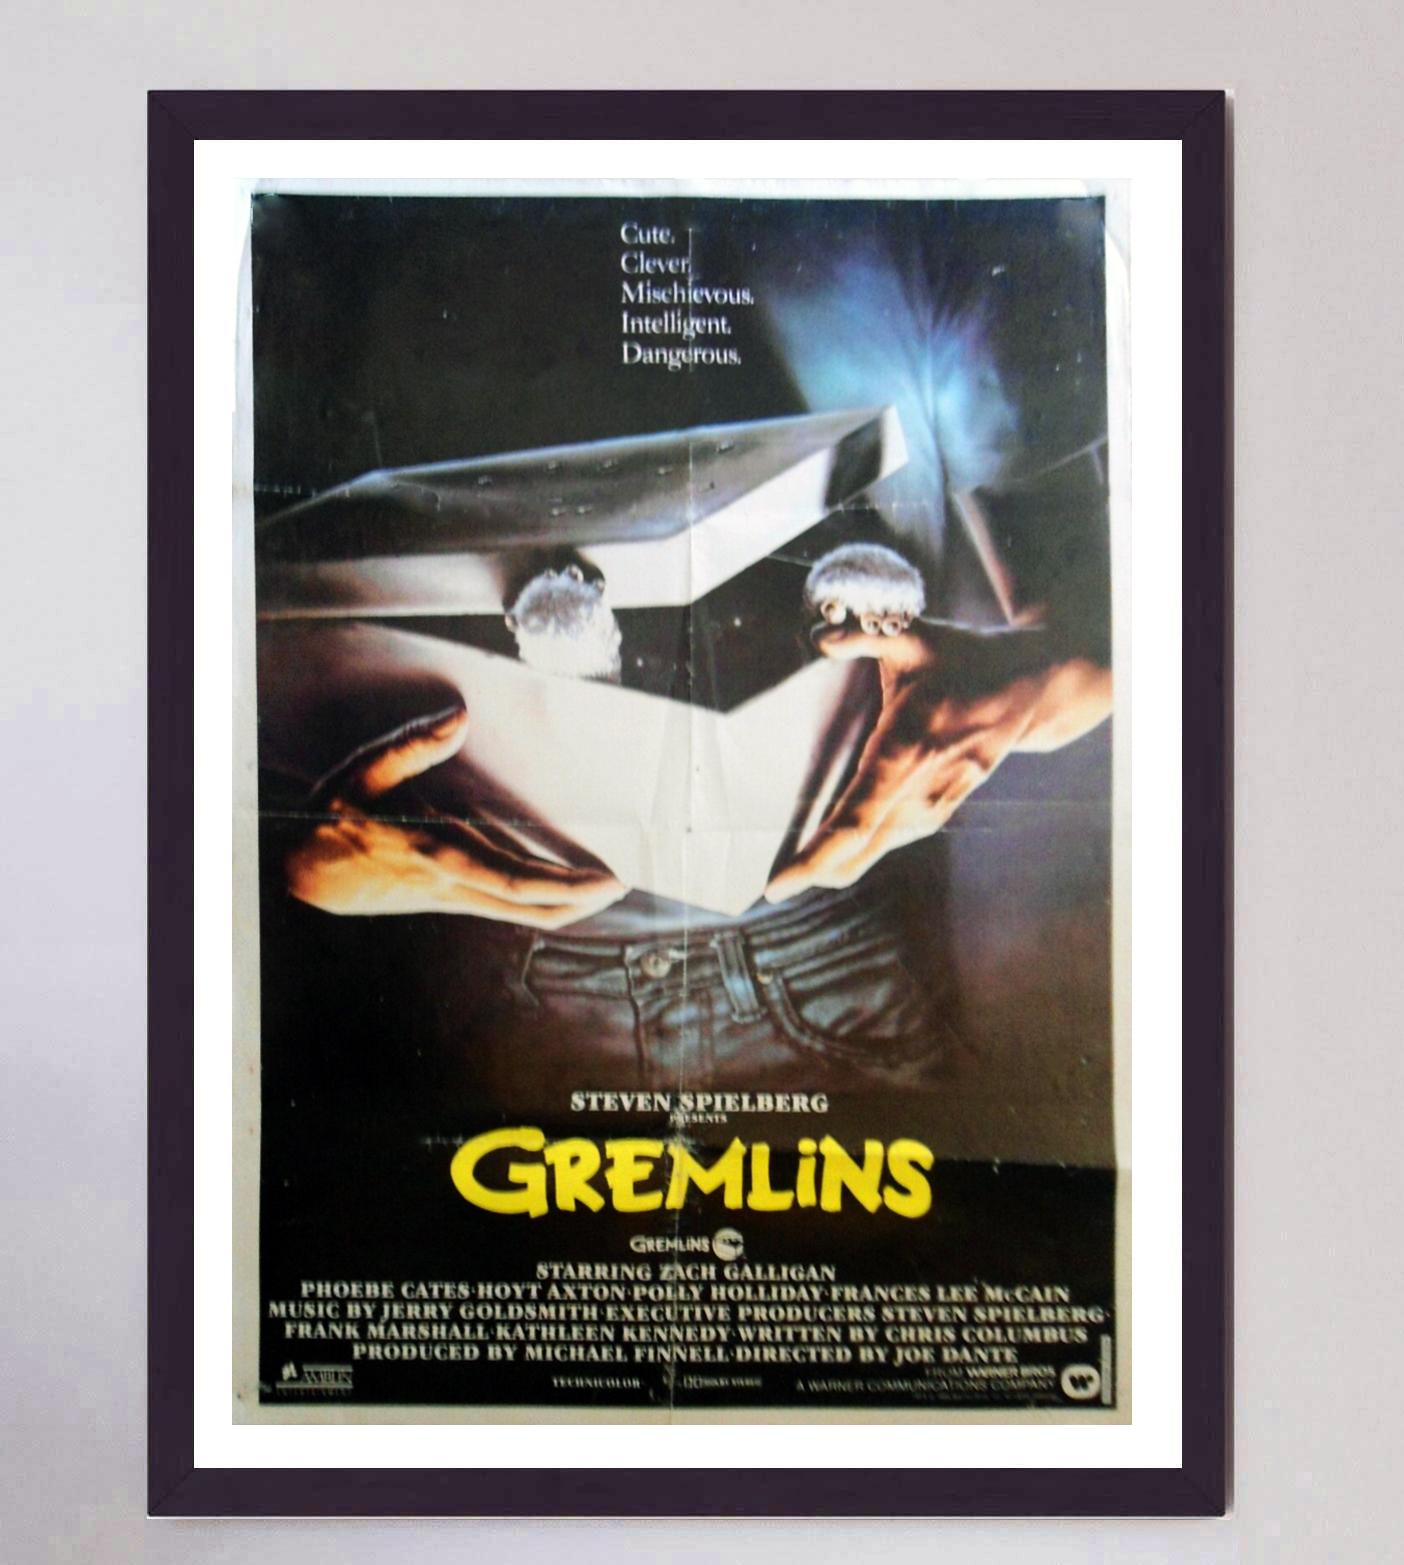 who wrote gremlins